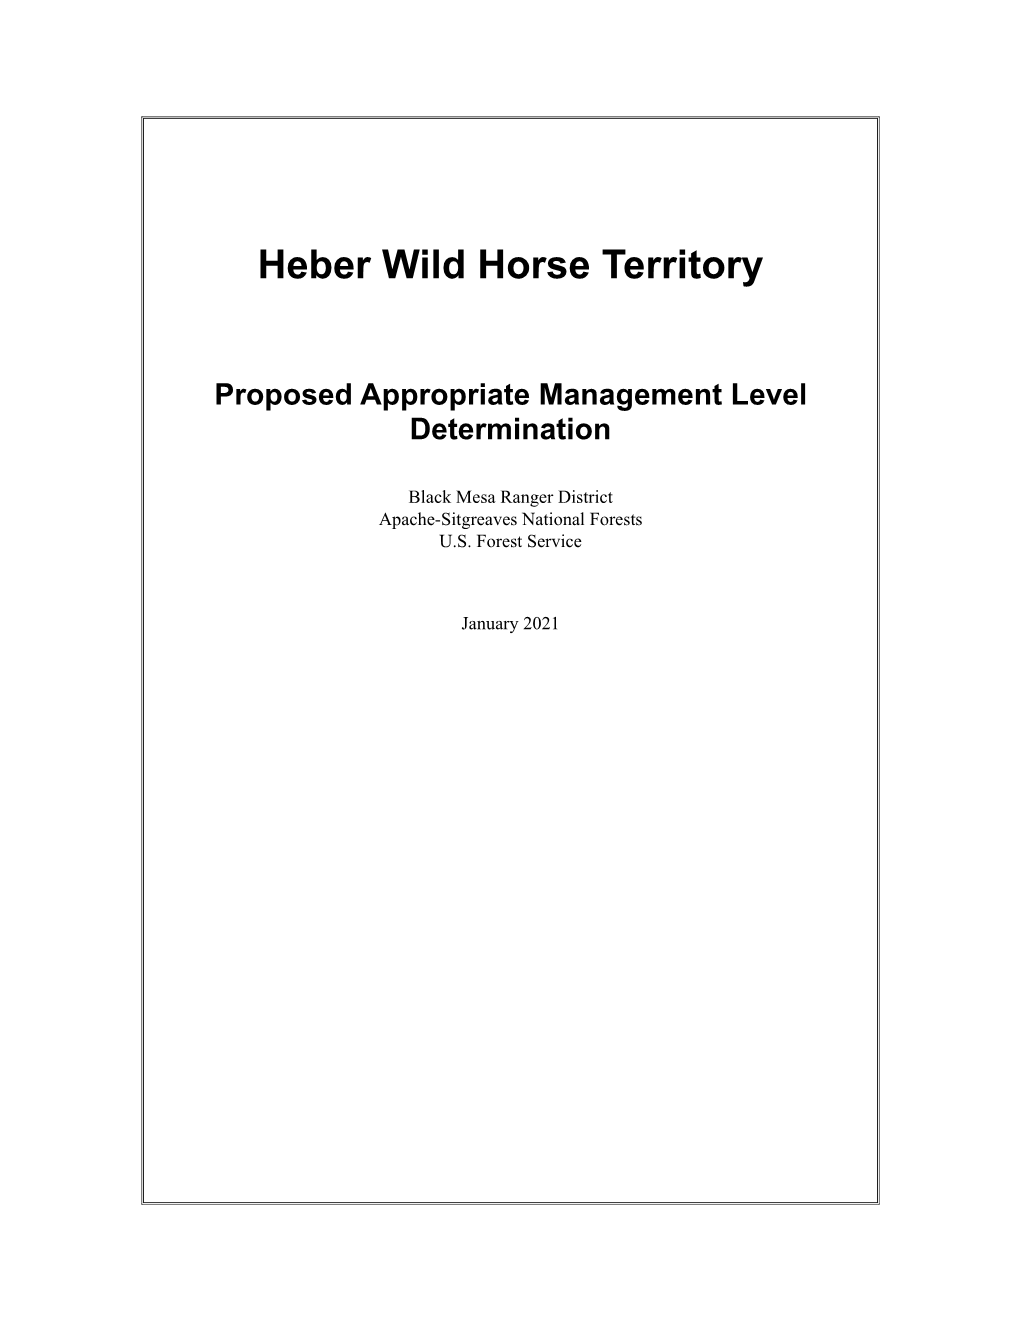 Heber Wild Horse Territory Proposed Appropriate Management Level Determination